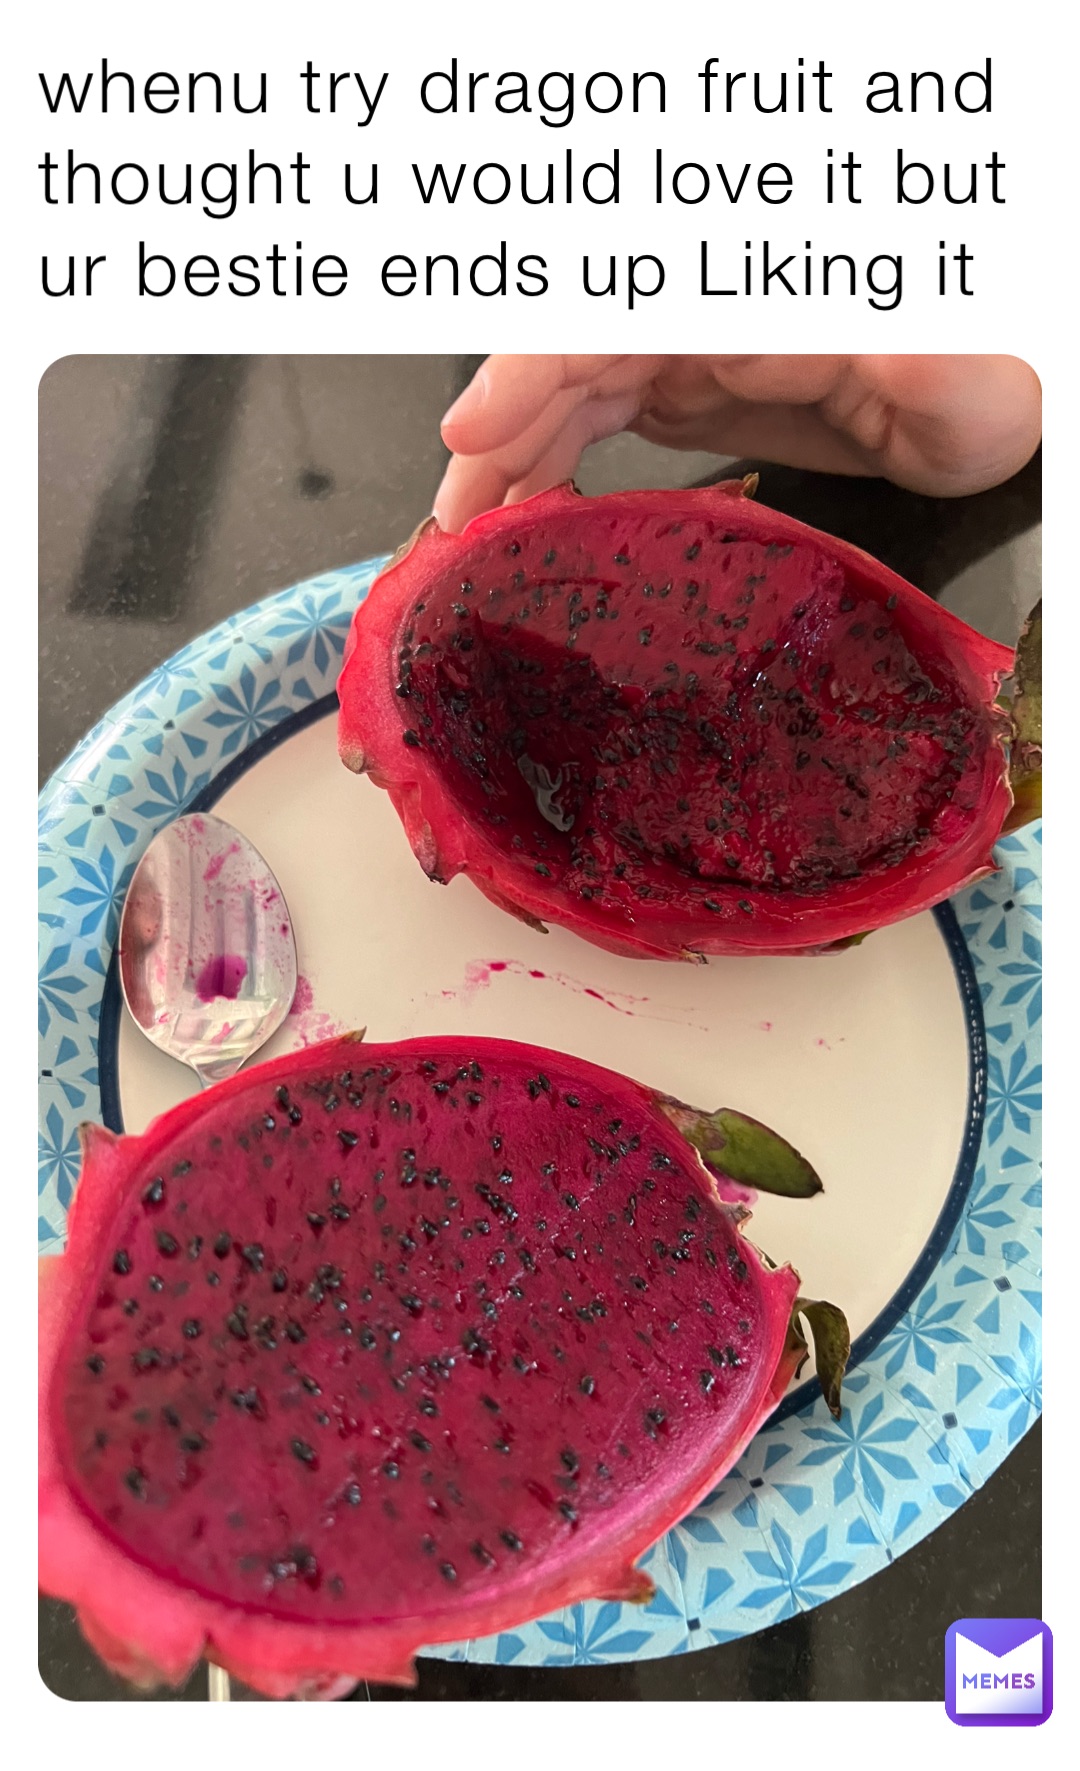 whenu try dragon fruit and thought u would love it but ur bestie ends up Liking it